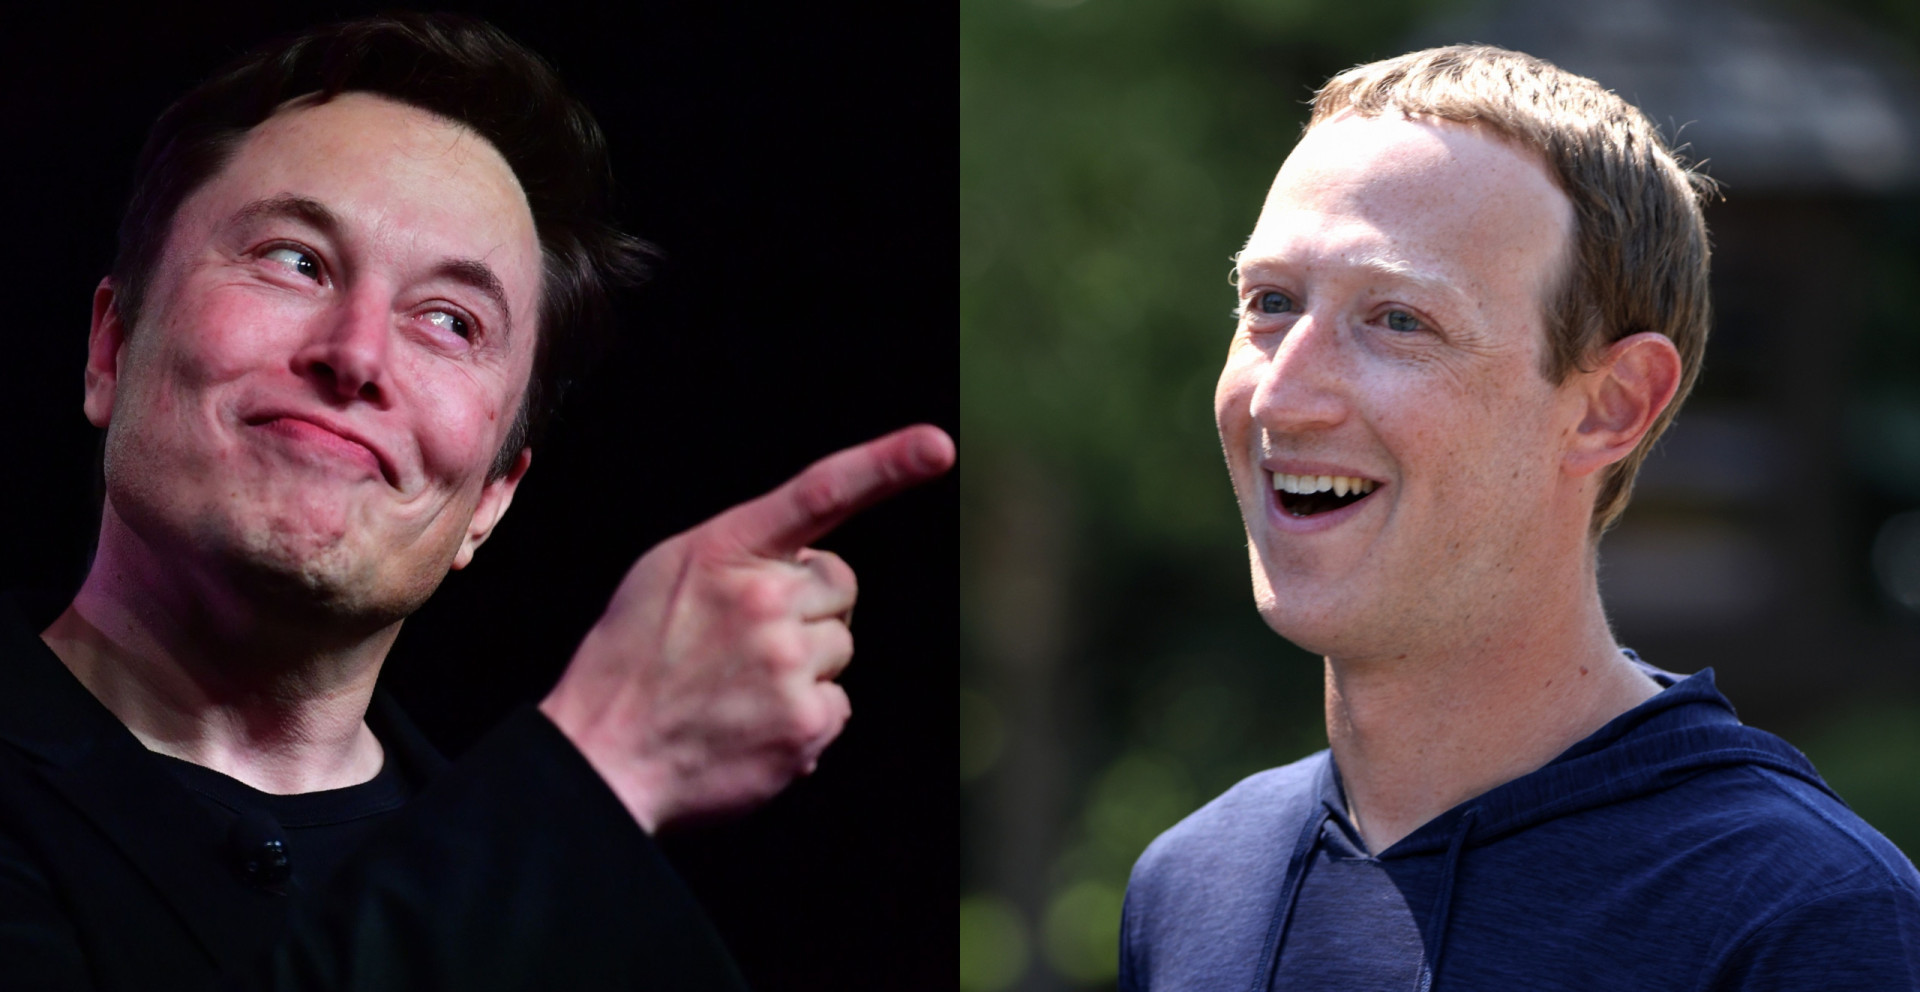 <p>In June 2023, Mark Zuckerberg and Elon Musk made headlines with their strange tech bro rivalry, which seems to be growing more absurd every day. It all began when Musk encouraged Twitter users who were mocking Zuckerberg's newfound jiu-jitsu skills. "I'm up for a cage match if he is lol," Musk commented on a troll's post. Surprisingly, Zuckerberg fired back the next day on Instagram, screenshotting the comment and writing, "Send Me Location." Musk then responded with "Vegas Octagon," a well-known venue for high-profile UFC fights in the US. However, it seems that they may have found an even more impressive location for their showdown: the Colosseum in Rome.</p><p><a href="https://www.msn.com/en-us/community/channel/vid-7xx8mnucu55yw63we9va2gwr7uihbxwc68fxqp25x6tg4ftibpra?cvid=94631541bc0f4f89bfd59158d696ad7e">Follow us and access great exclusive content every day</a></p>